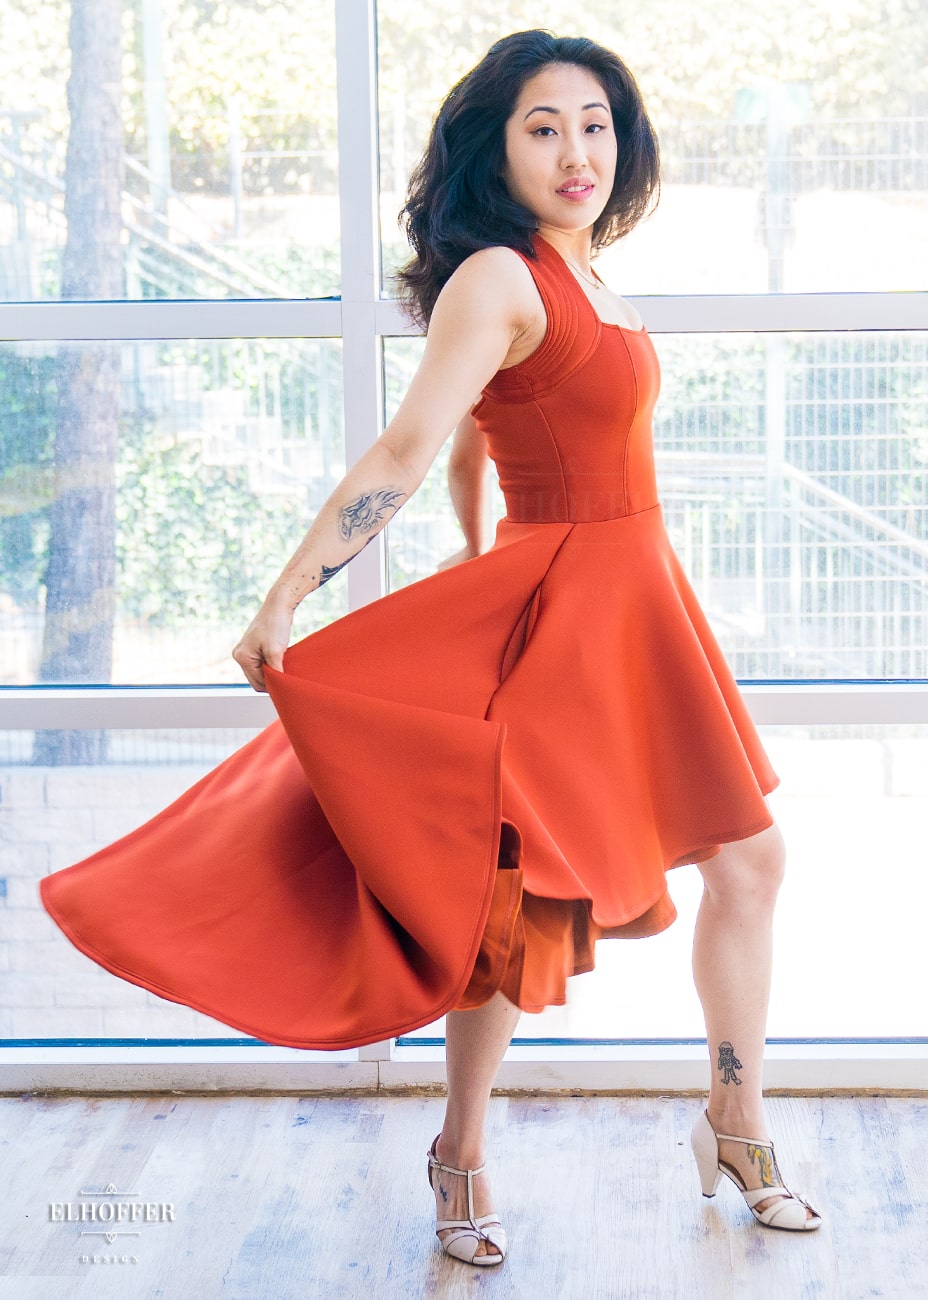 Kate, a size XS olive skinned model with long dark hair, is wearing a rust orange dress with a scoop neck, quilted sleeveless shoulders, with hooks at the back. The skirt is high low, falling to the knees at the front and ankles at the back.